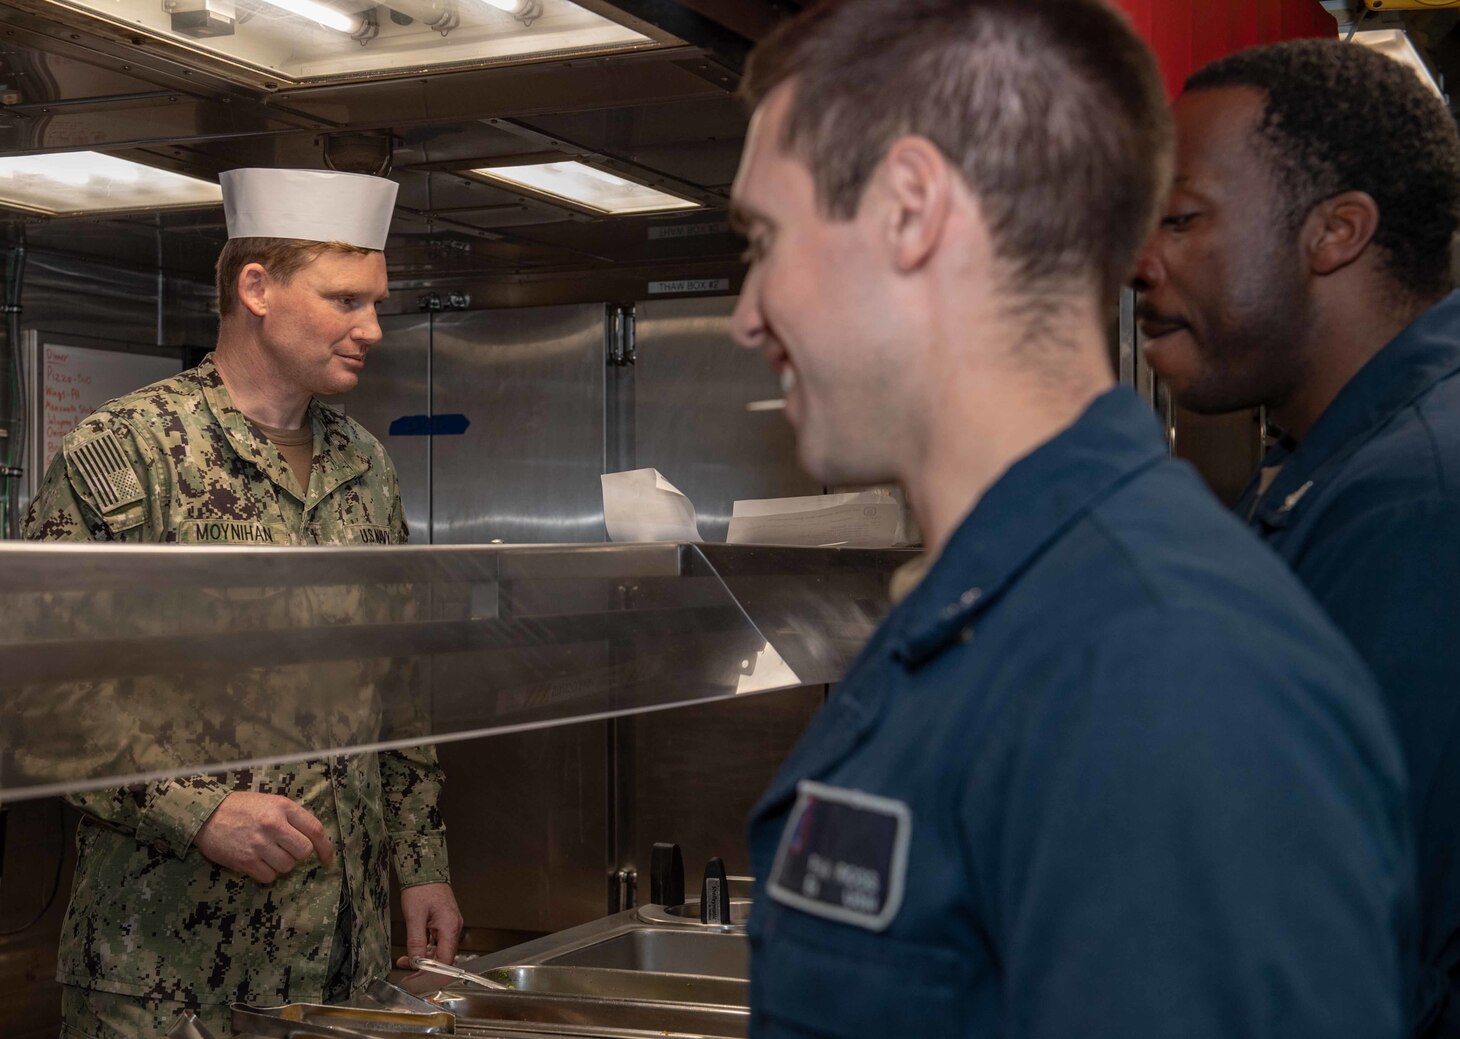 Lt. Matthew Moynihan, Chaplain aboard Arleigh Burke-class guided-missile destroyer USS Higgins (DDG 76) serves Sailors during a meal. Higgins is assigned to Commander, Task Force (CTF) 71/Destroyer Squadron (DESRON) 15, the Navy's largest forward-deployed DESRON and the U.S. 7th Fleet's principal surface force.